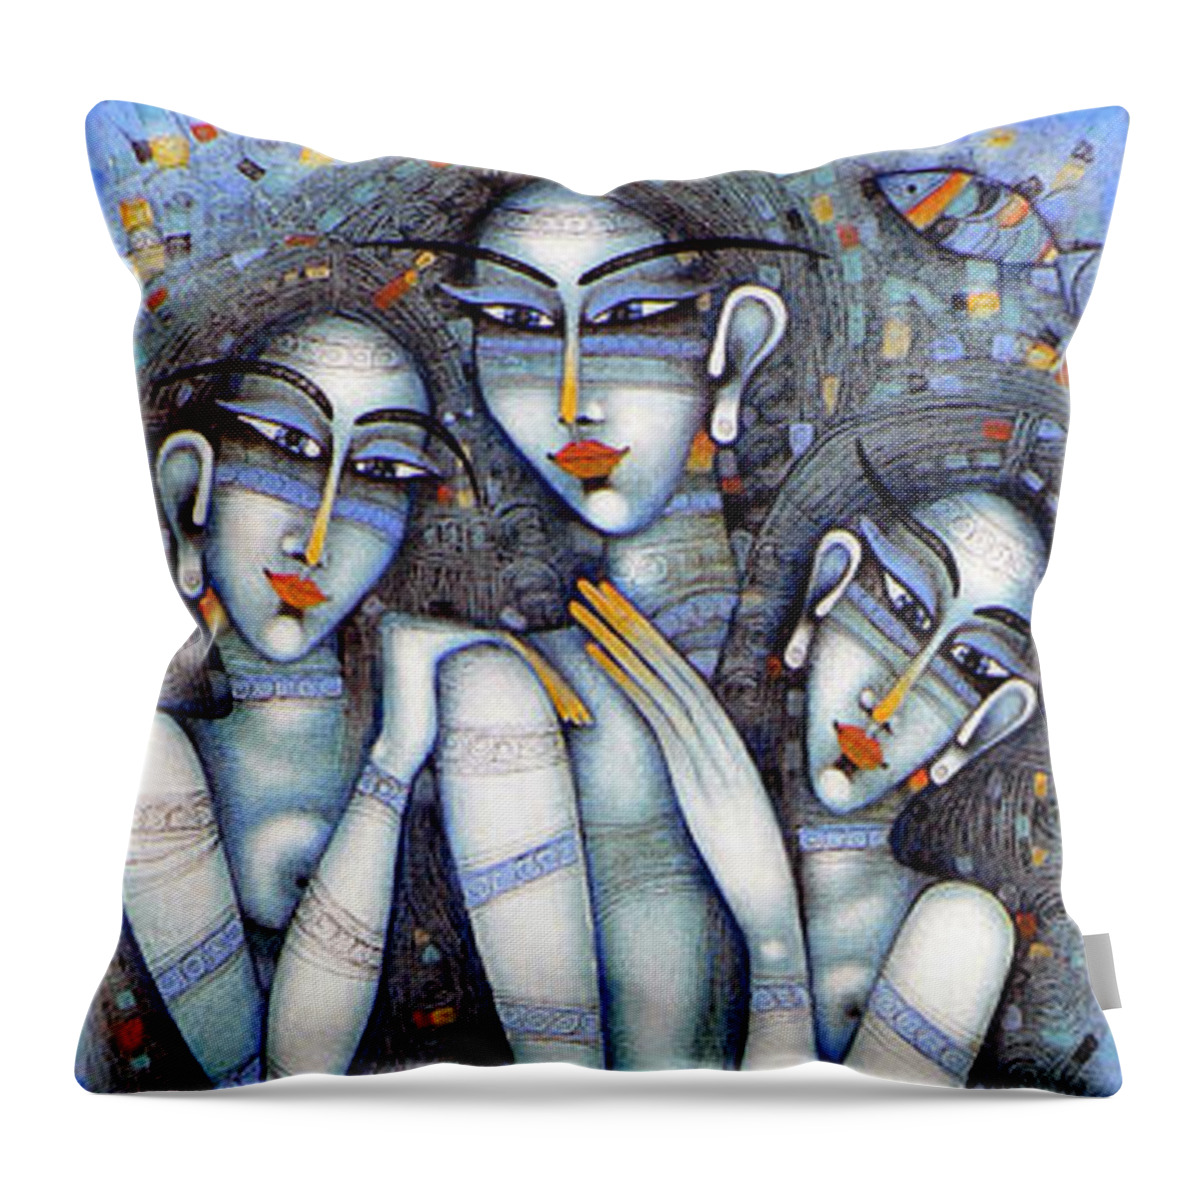 Fish Throw Pillow featuring the painting The little mermaids of Andersen by Albena Vatcheva